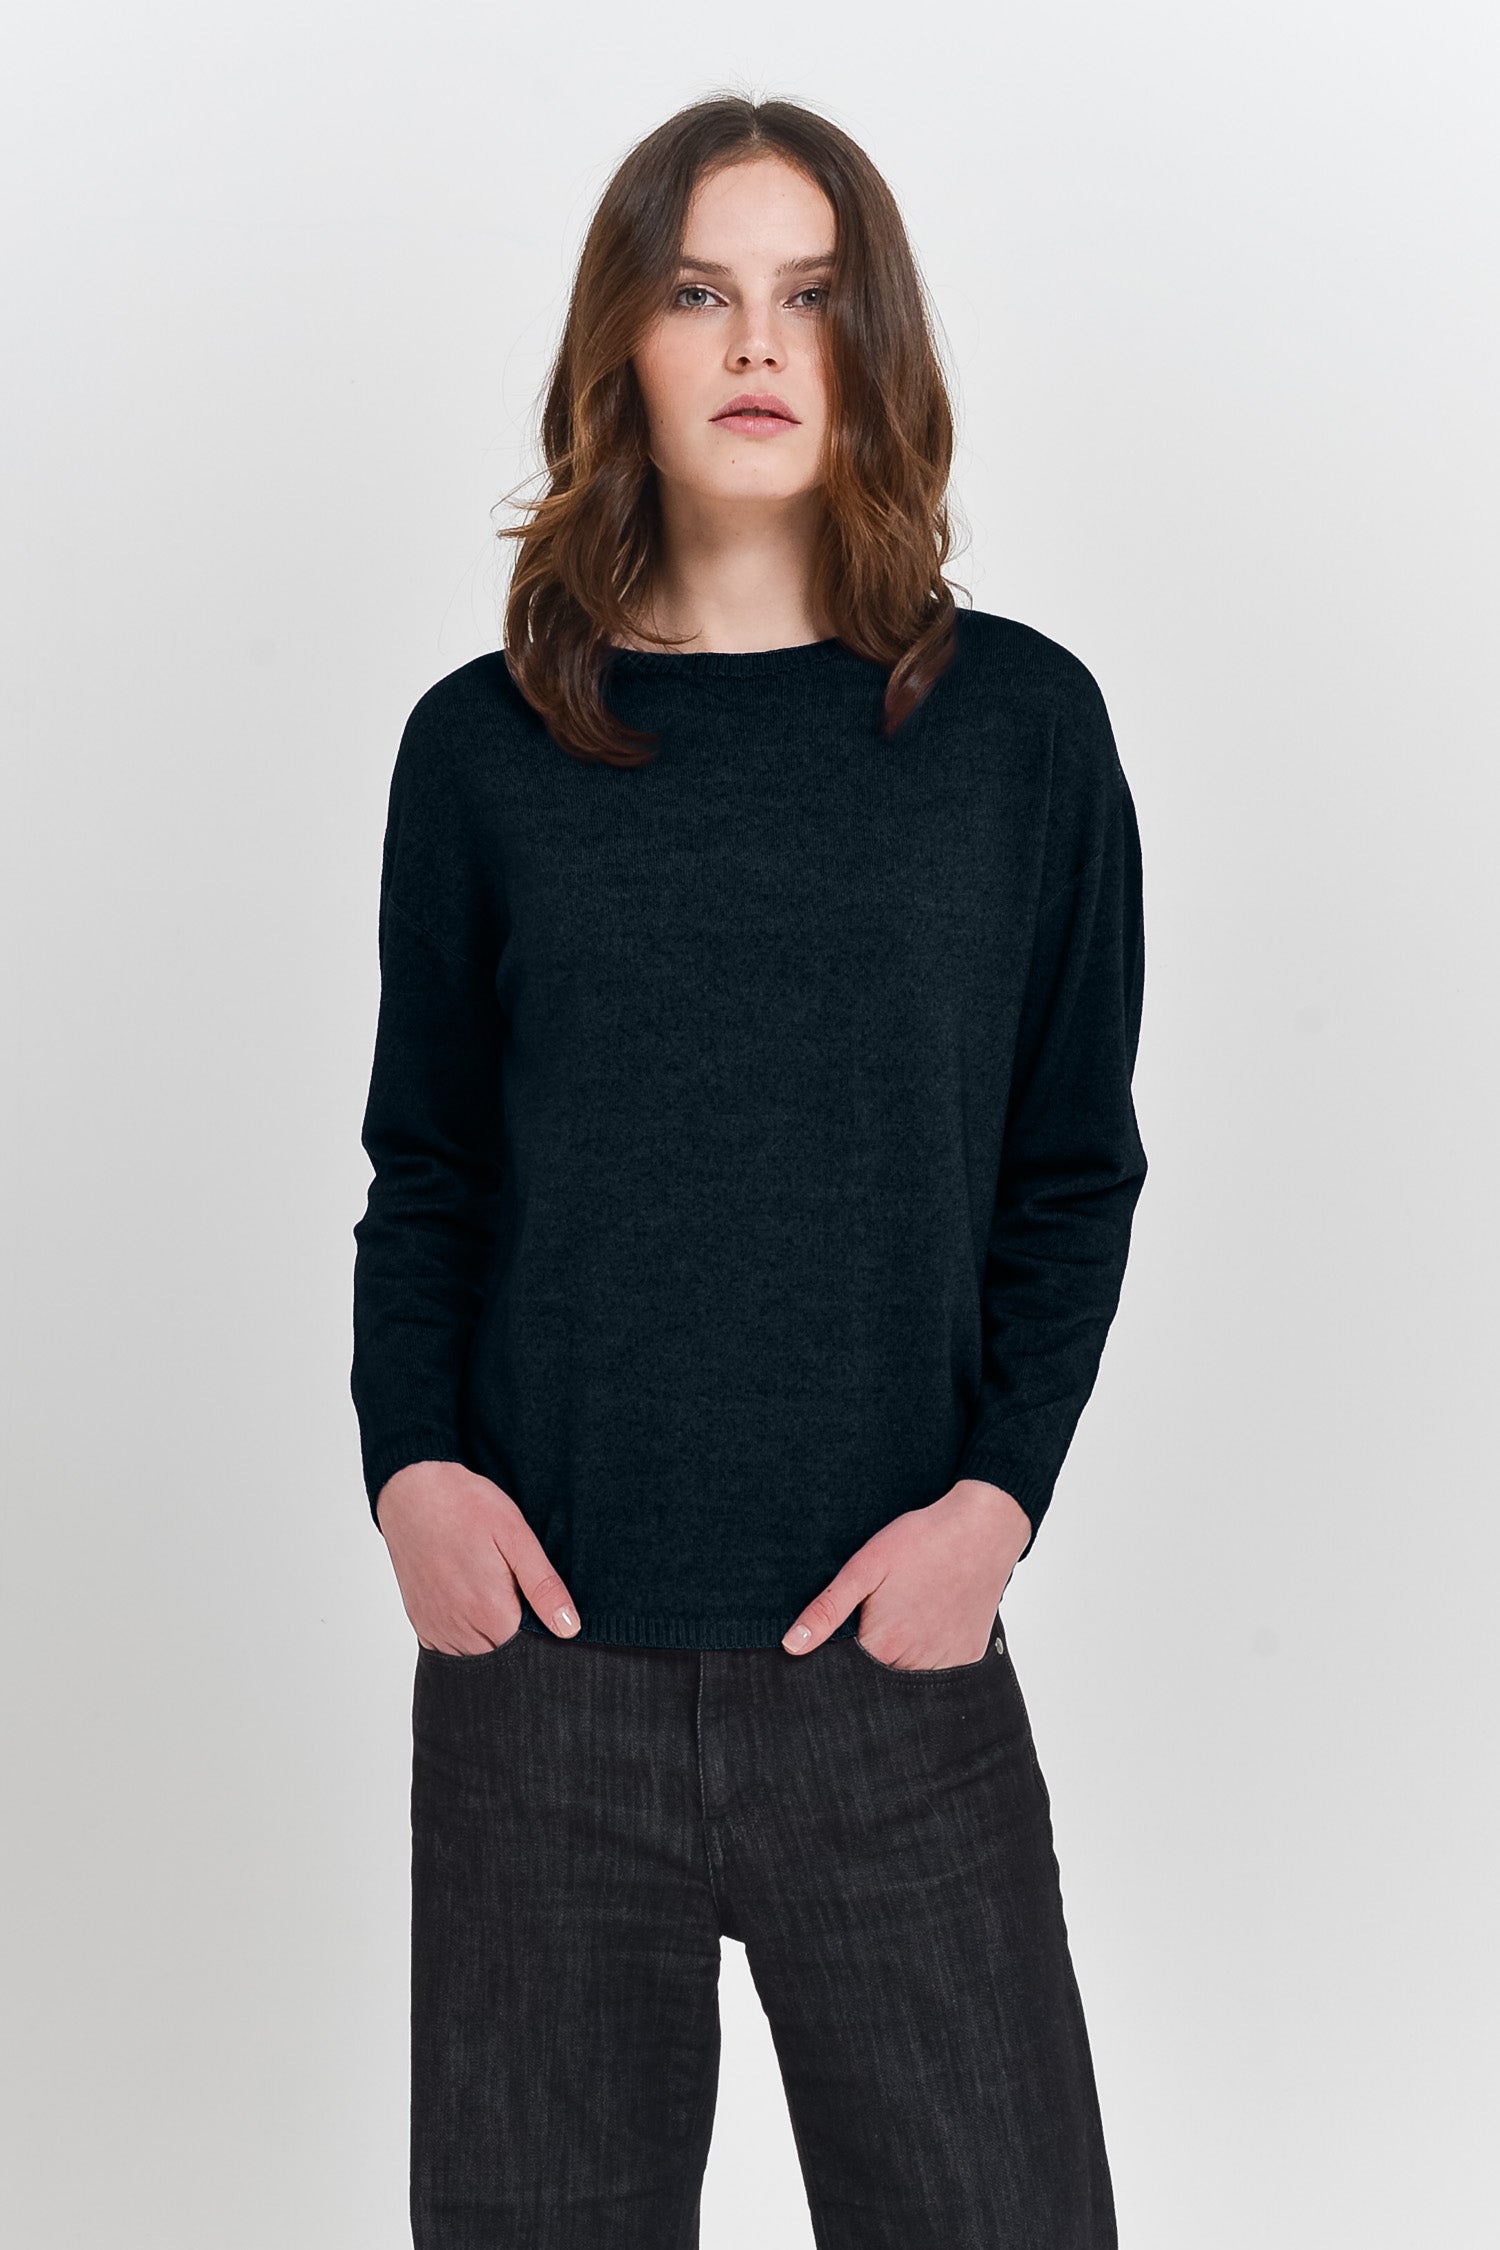 Reay Comfy Sweater - Abyss